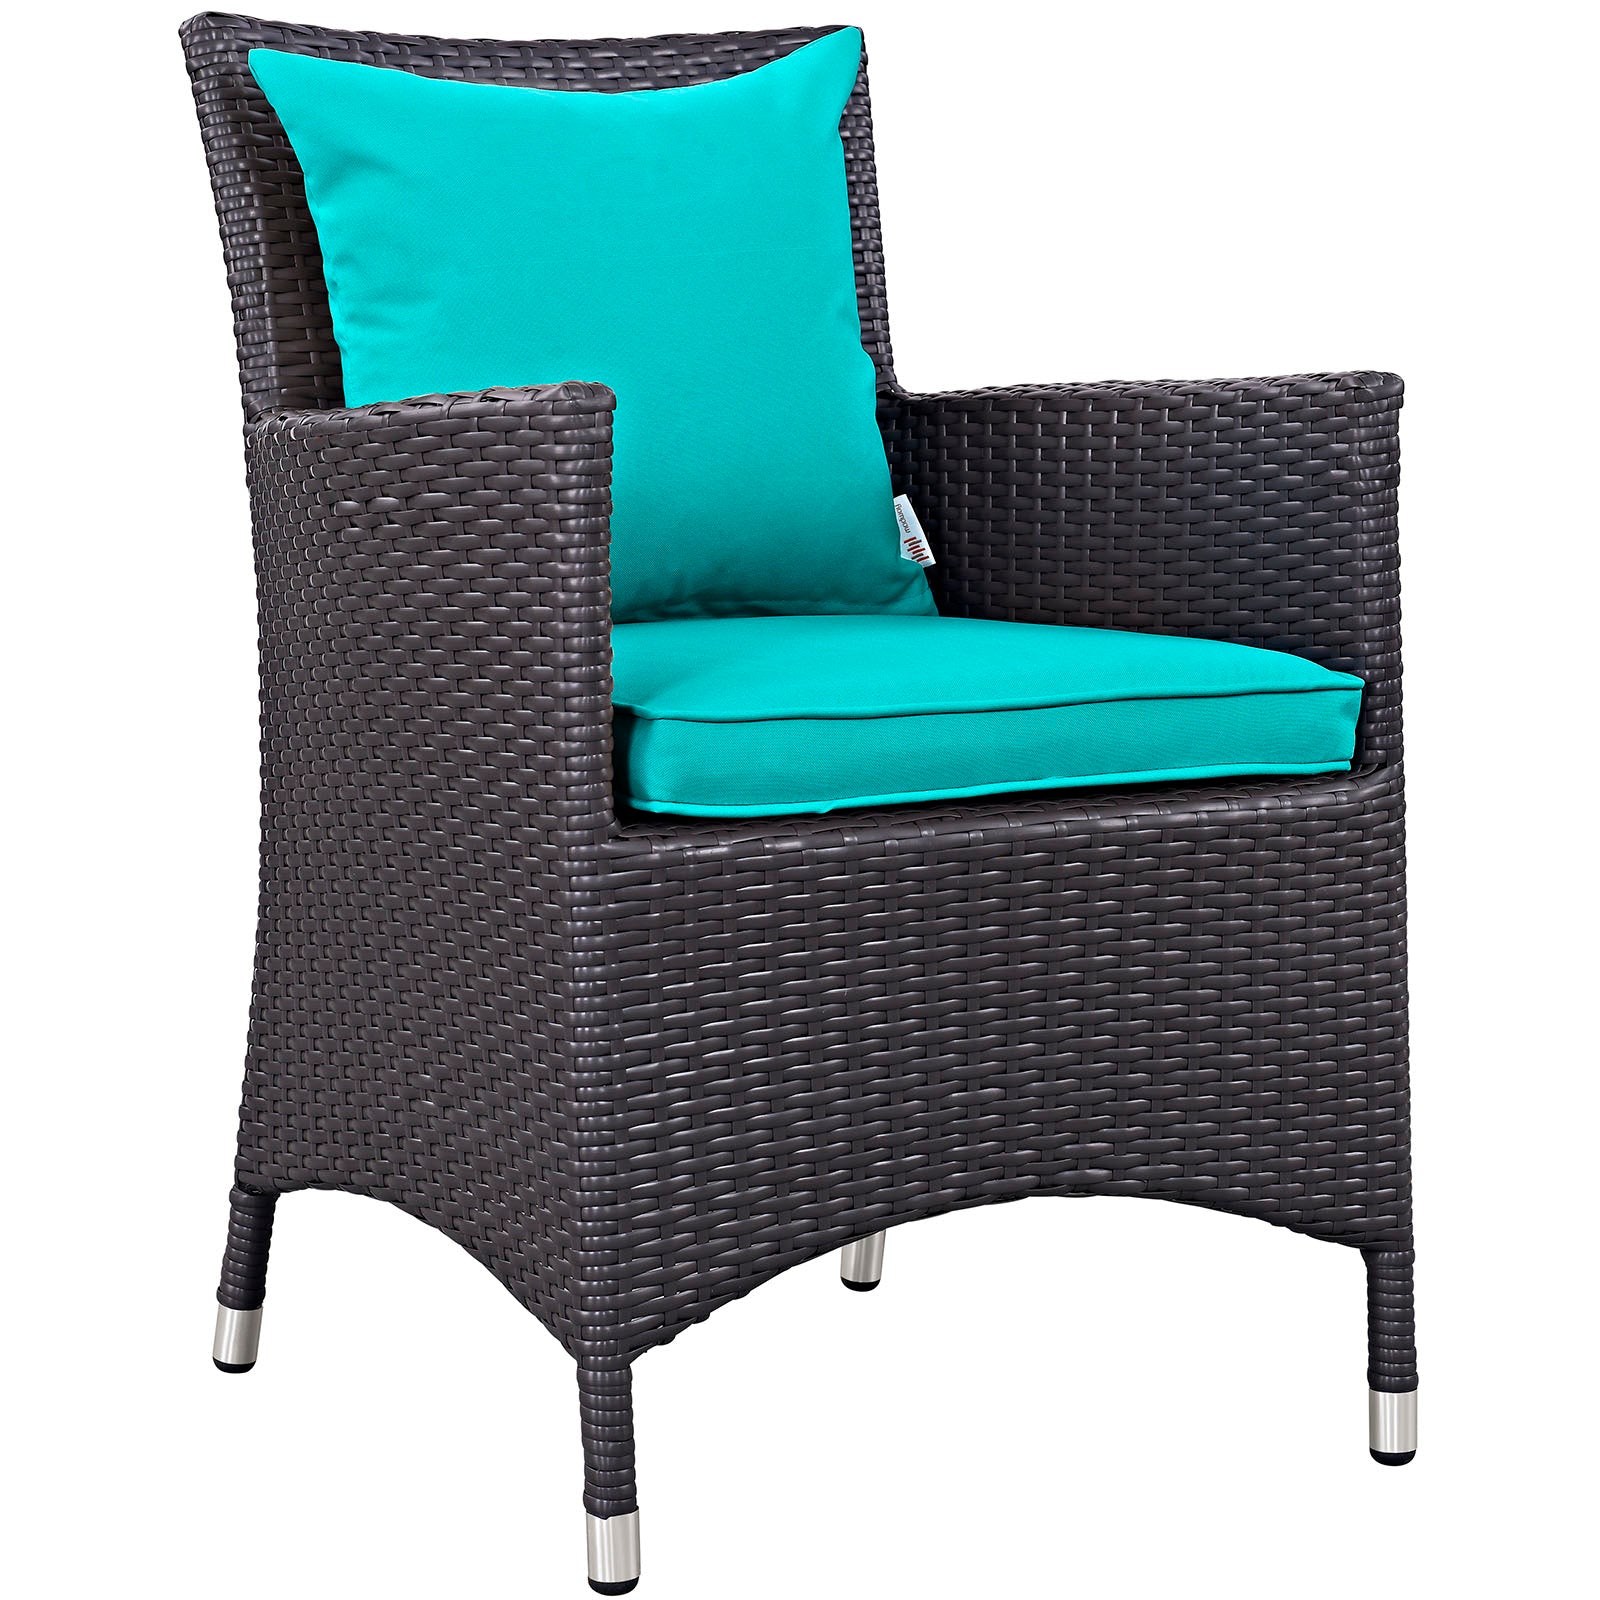 Modway Outdoor Dining Sets - Convene 7 Piece Outdoor Patio Dining Set Turquoise